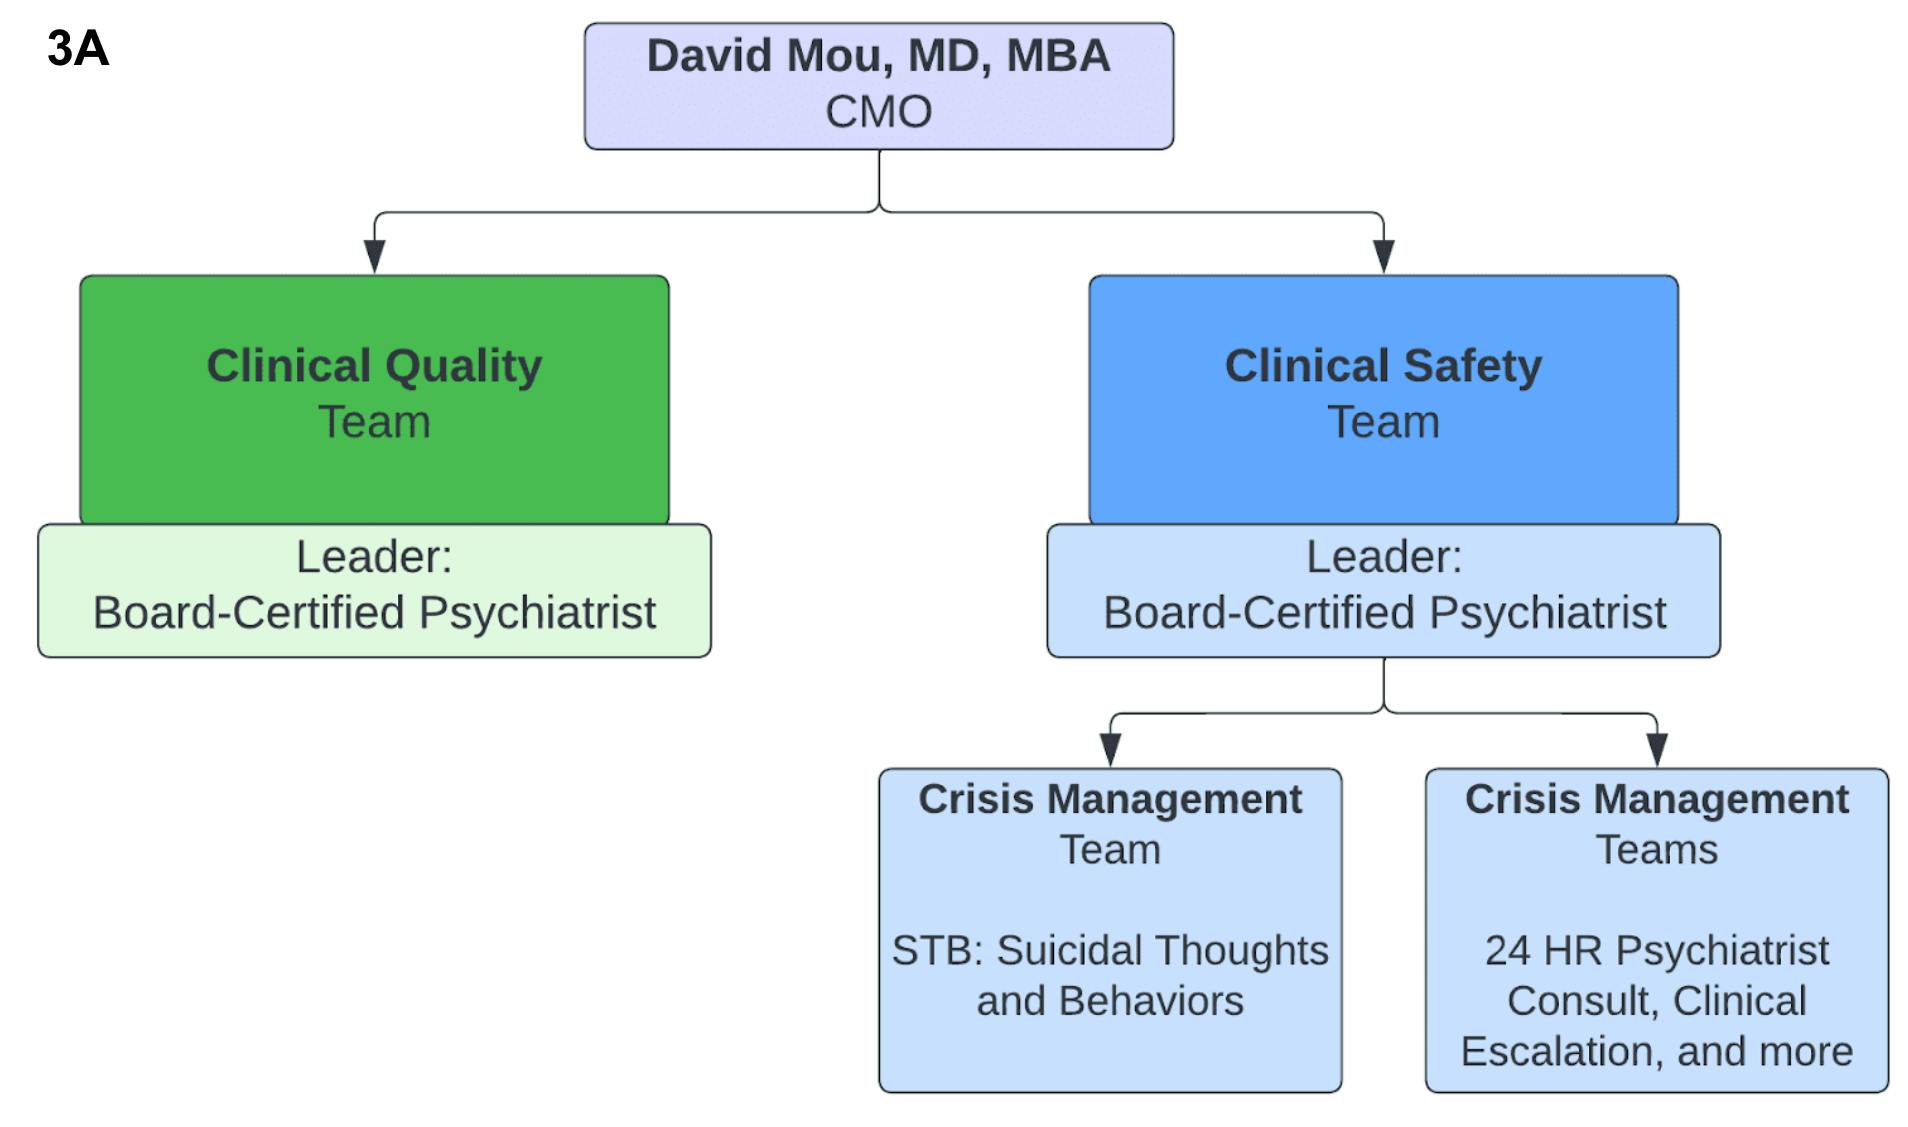 Graphic showing Cerebral Clinical Quality and Clinical Safety team reporting to David Mou